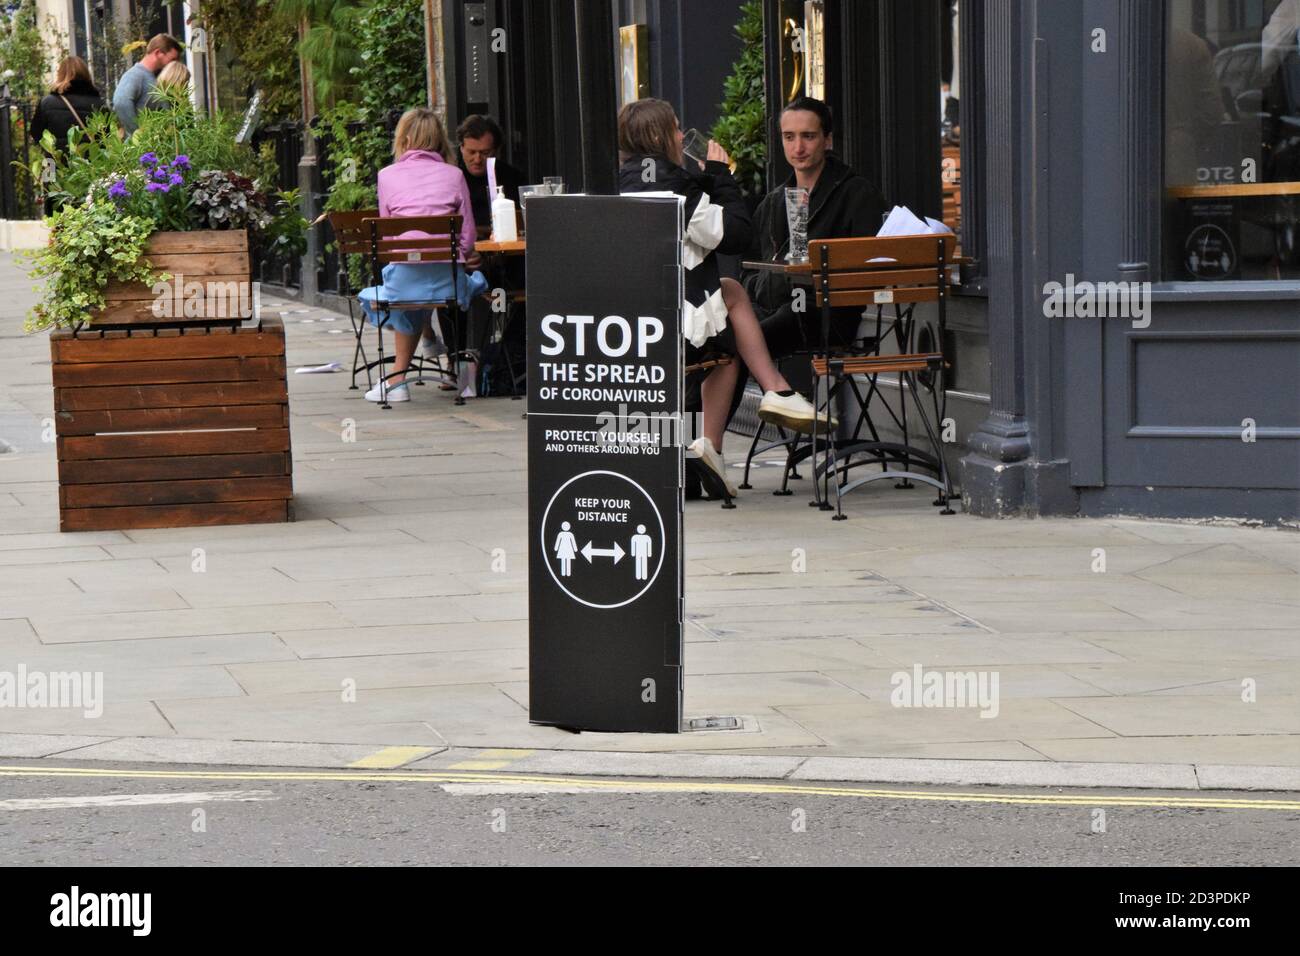 People walking past a Stop The Spread of Coronavirus street sign in Covent Garden, London, 2020. Signs have been placed all around Covent Garden streets and market to encourage social distancing. Stock Photo